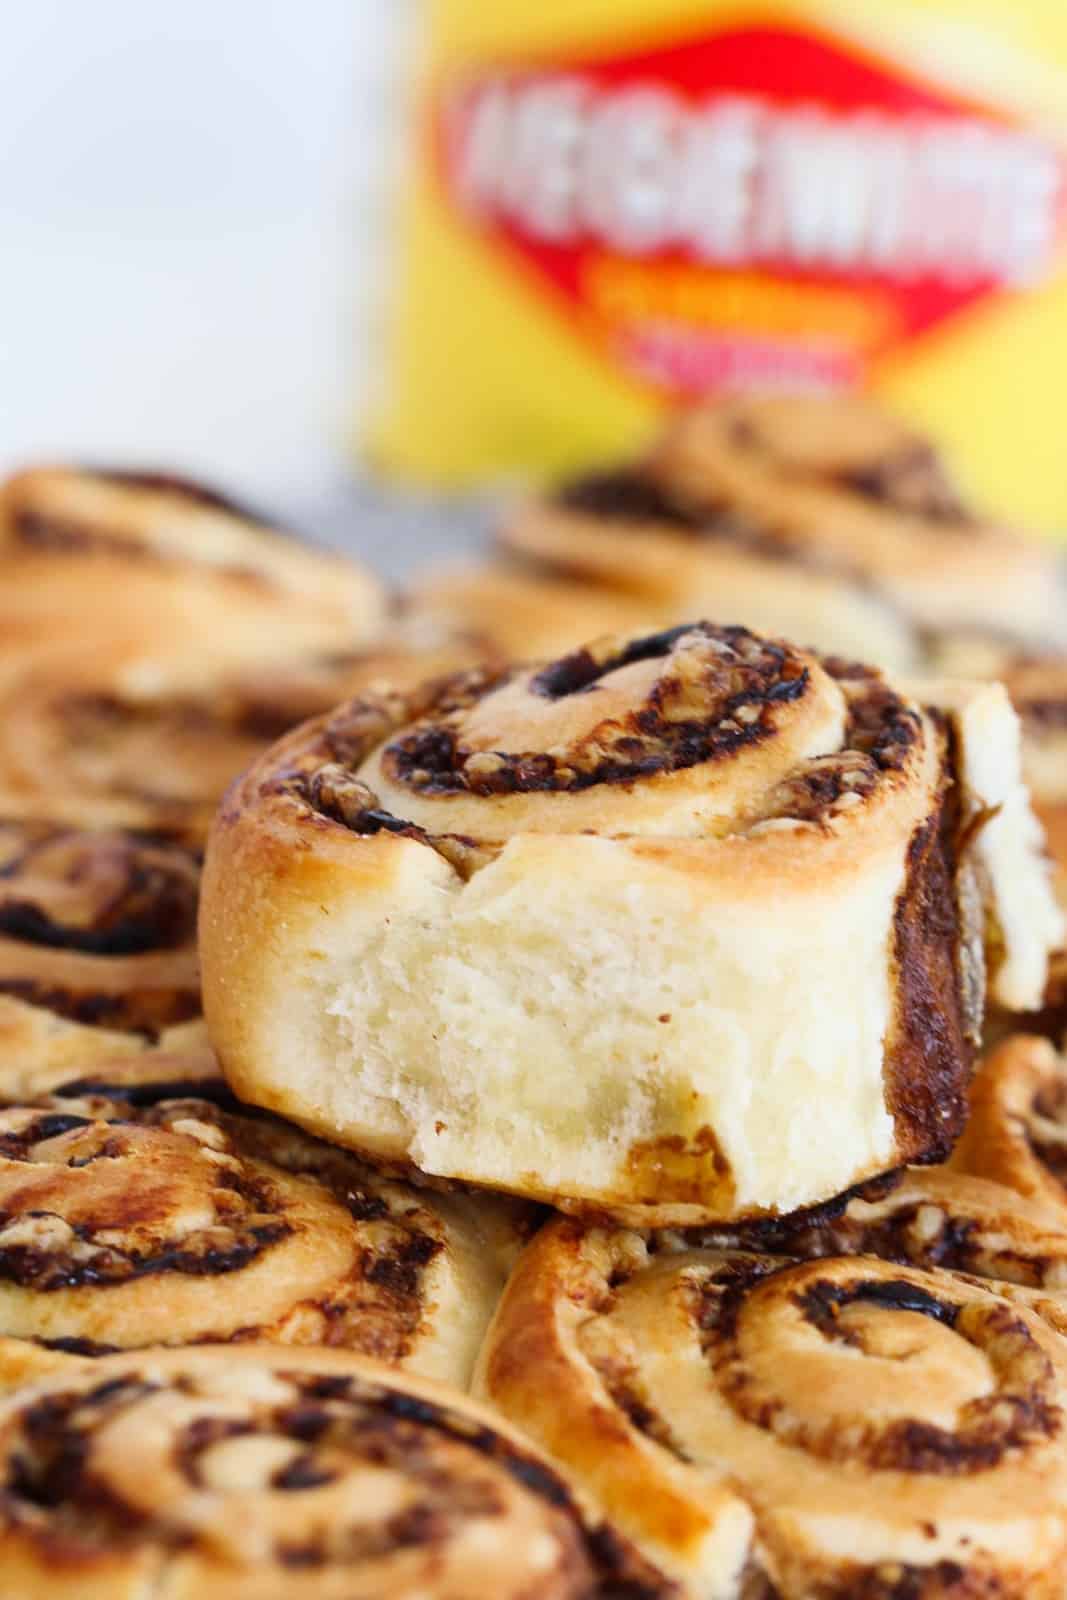 A pile of cheese and Vegemite scrolls with one placed on top.